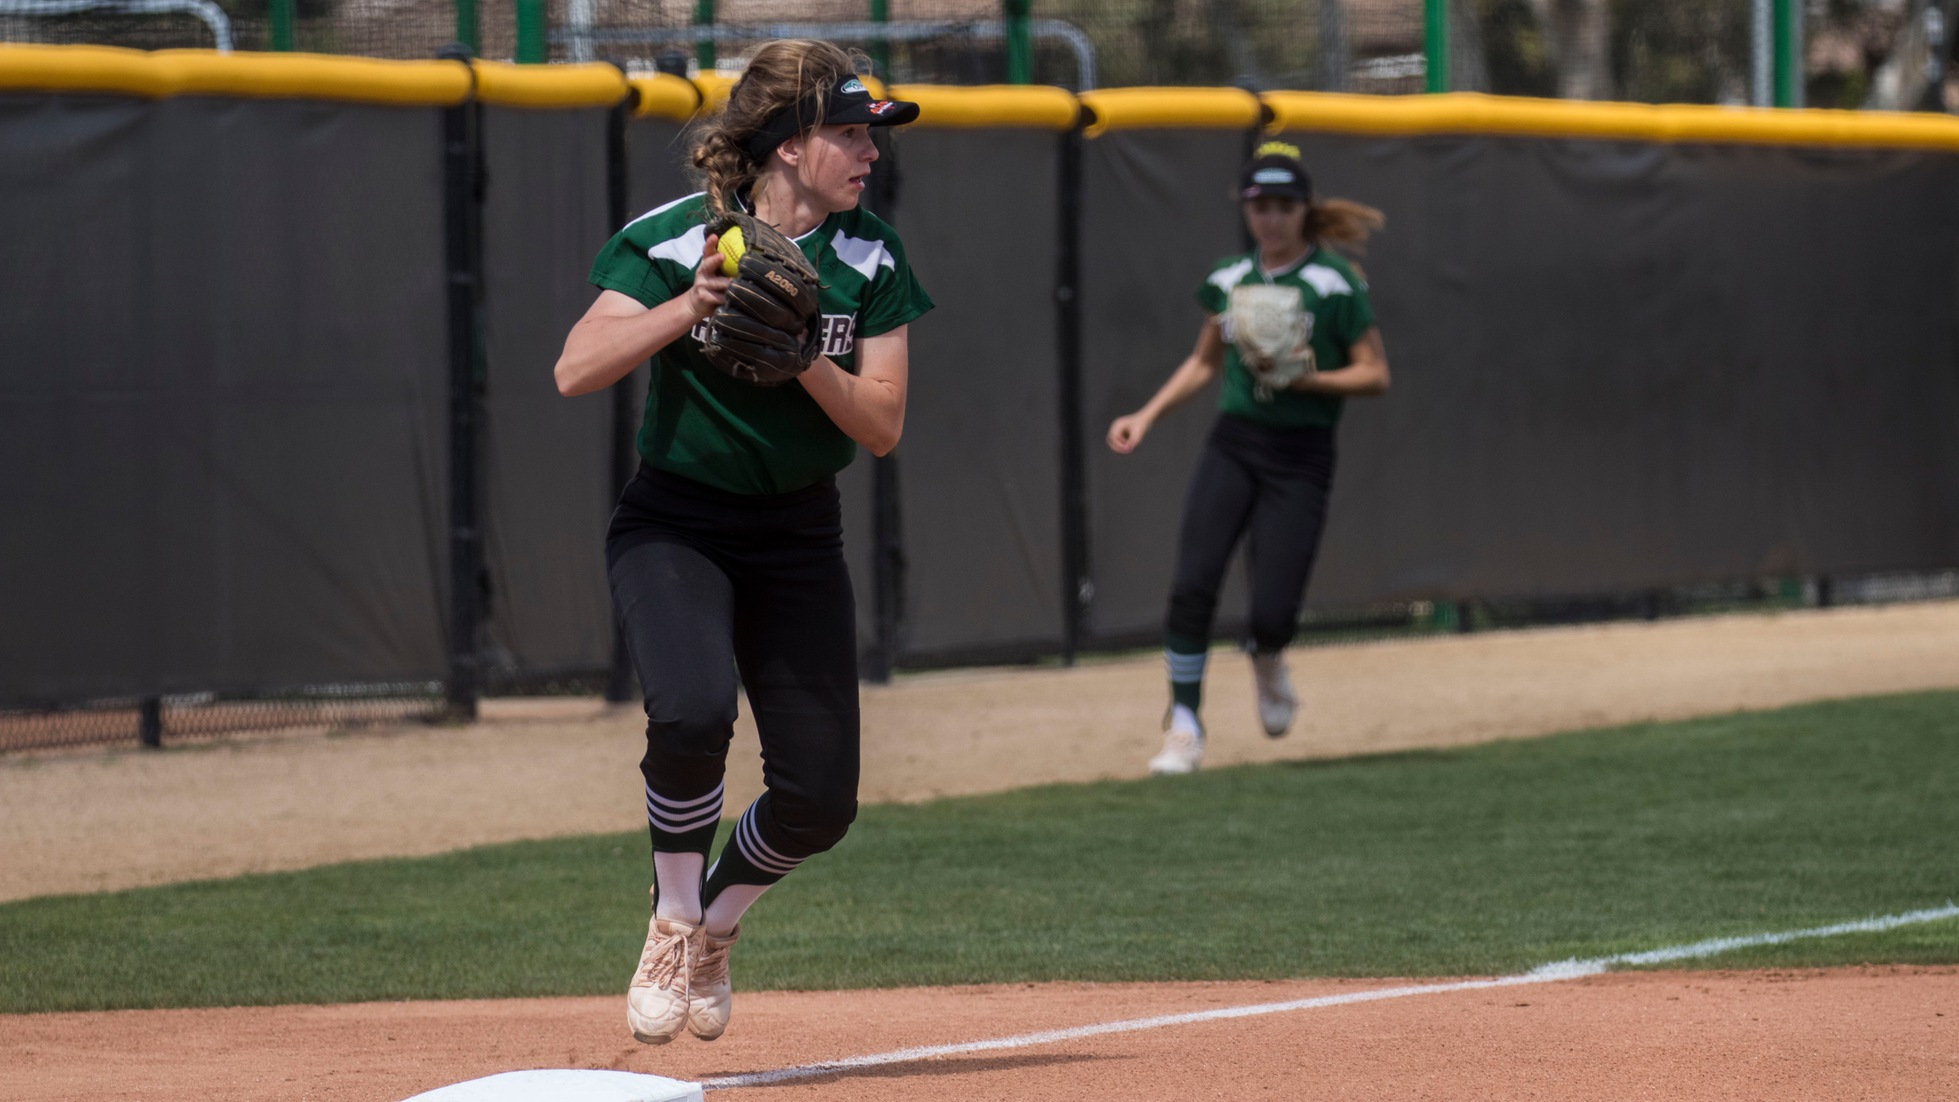 Softball: No Hit in Conference Loss